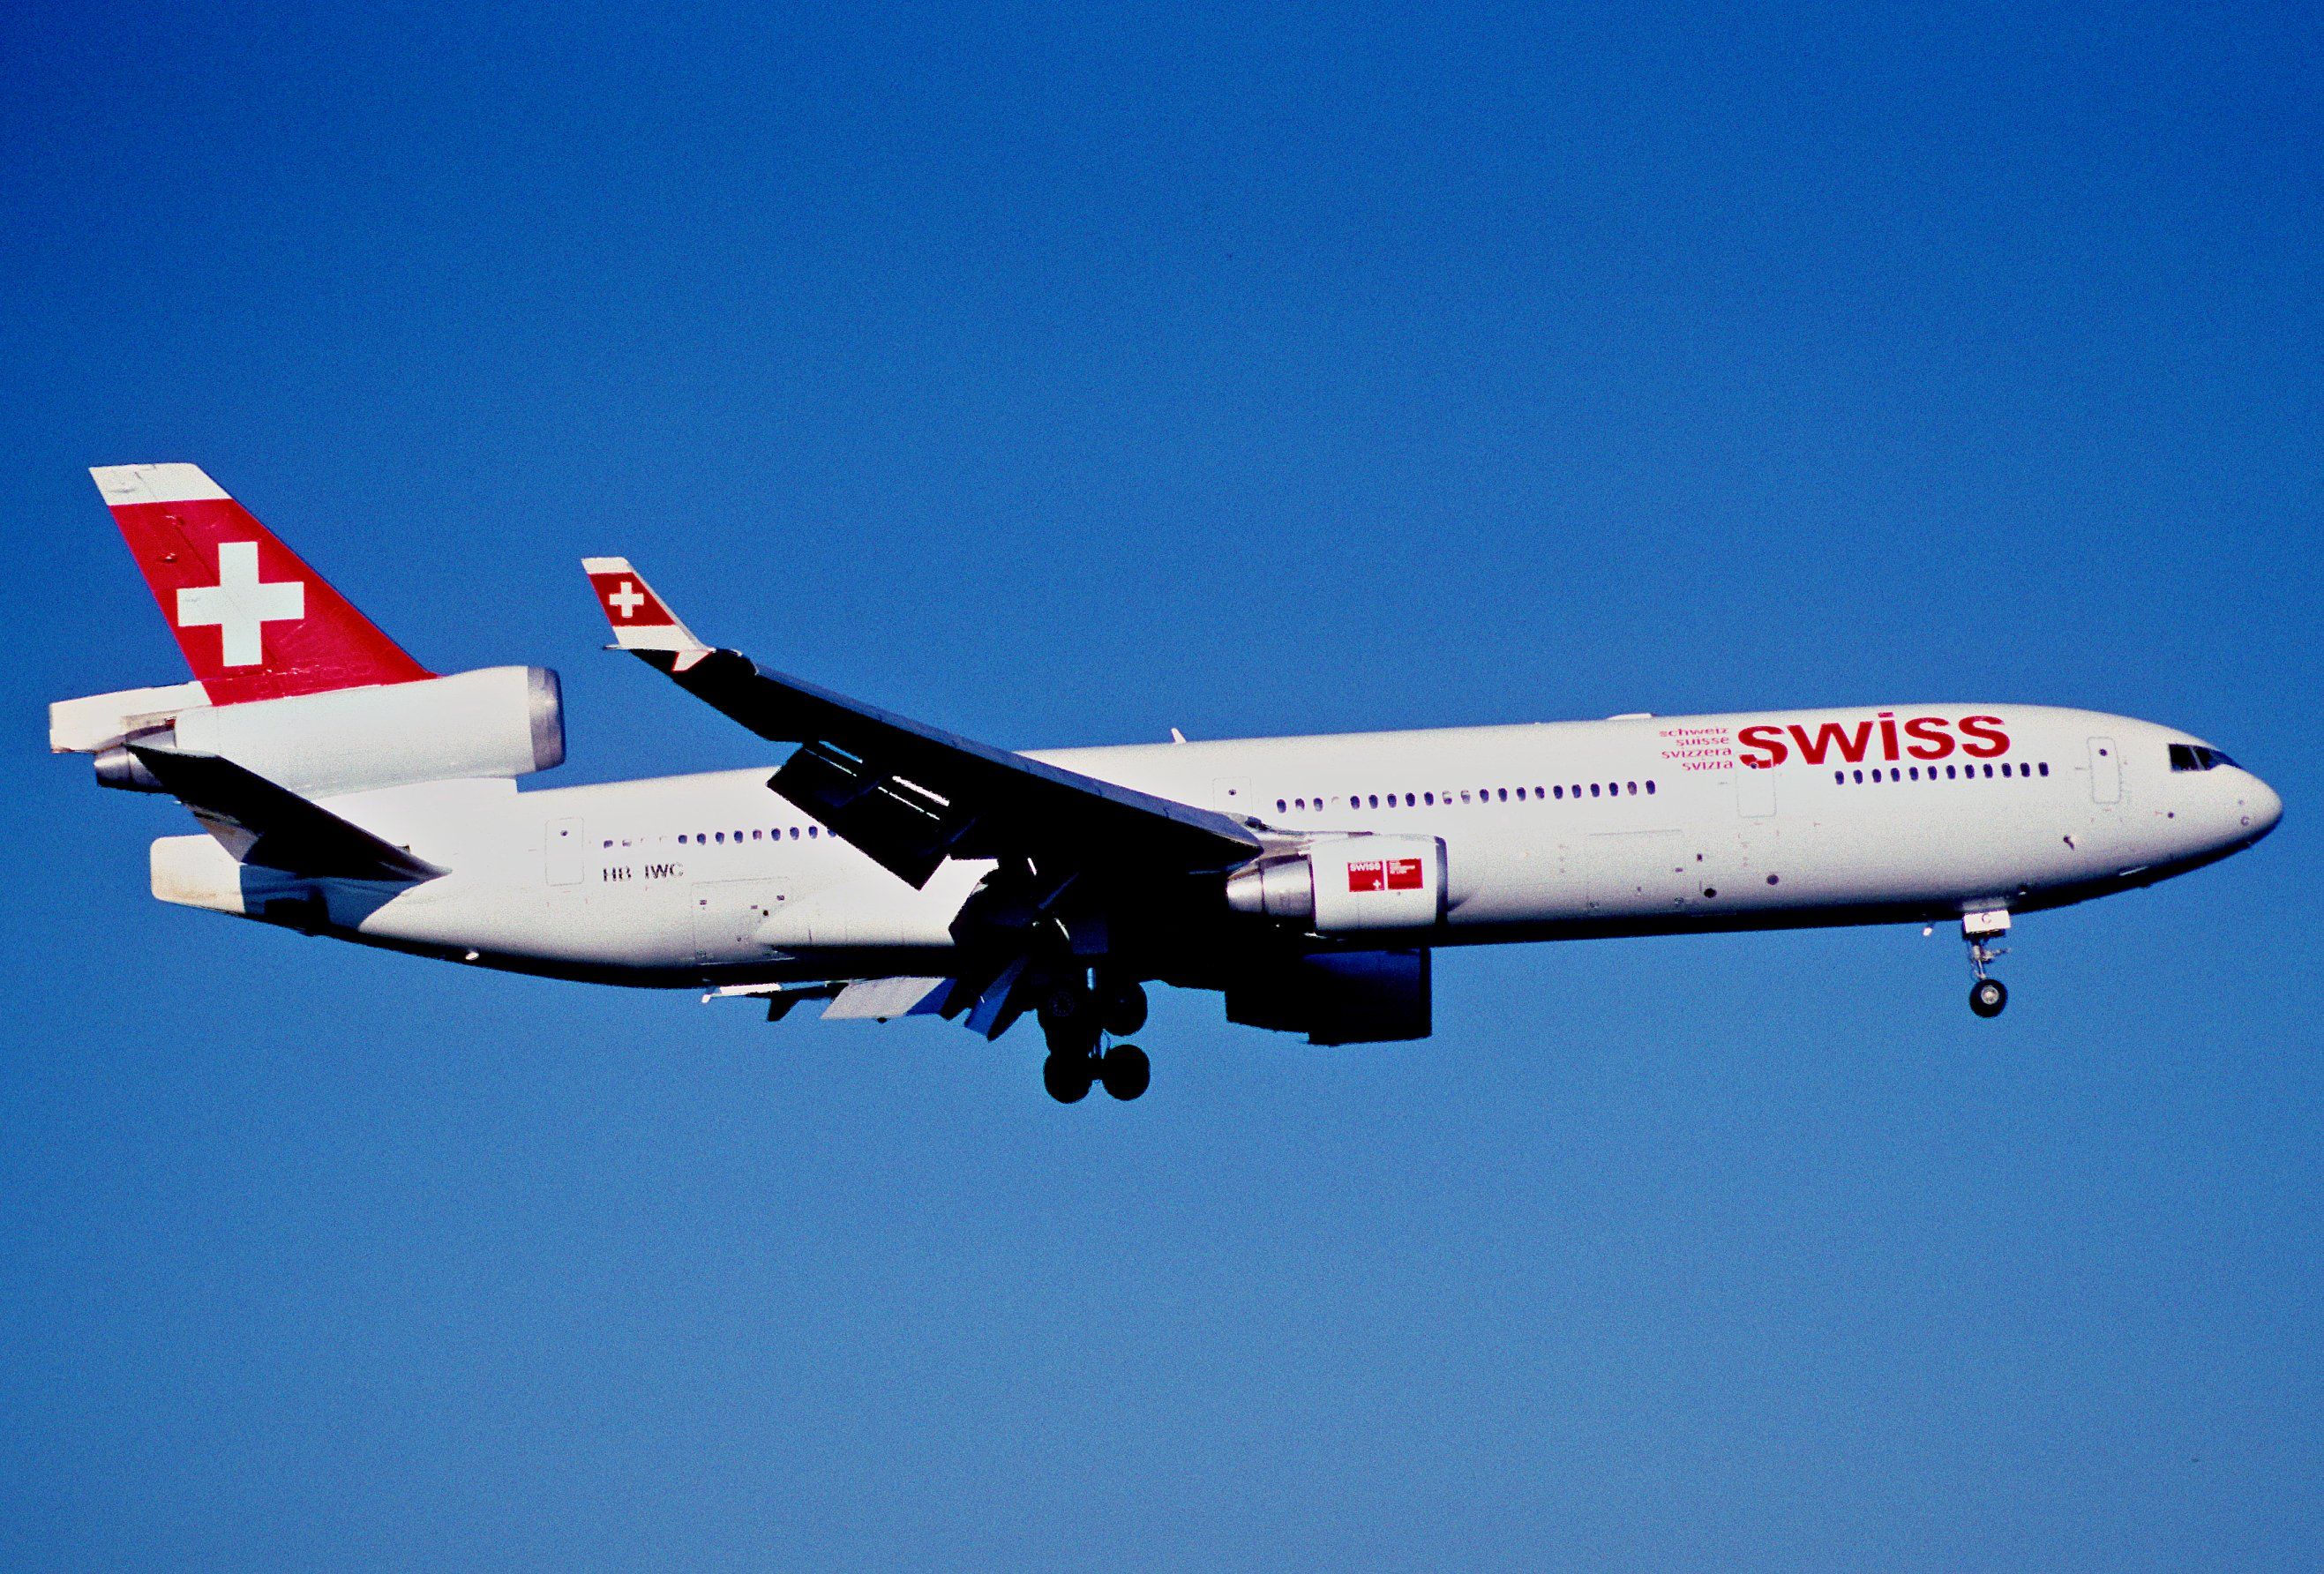 A SWISS MD-11 flying in the sky.